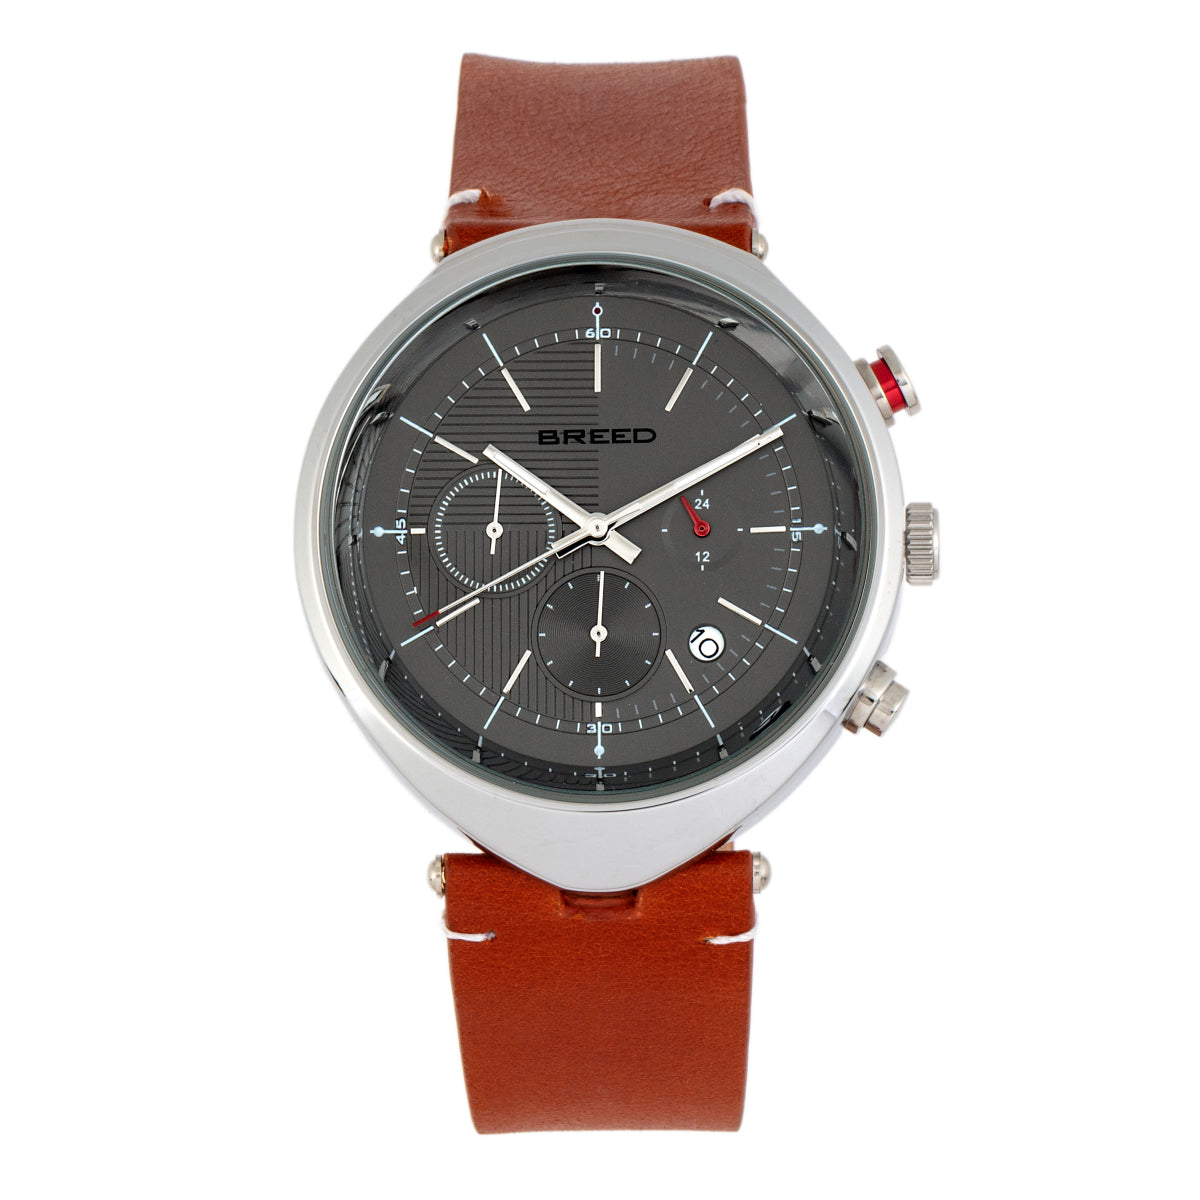 Breed Tempest Chronograph Leather-Band Watch w/Date - Brown/Grey - BRD8604